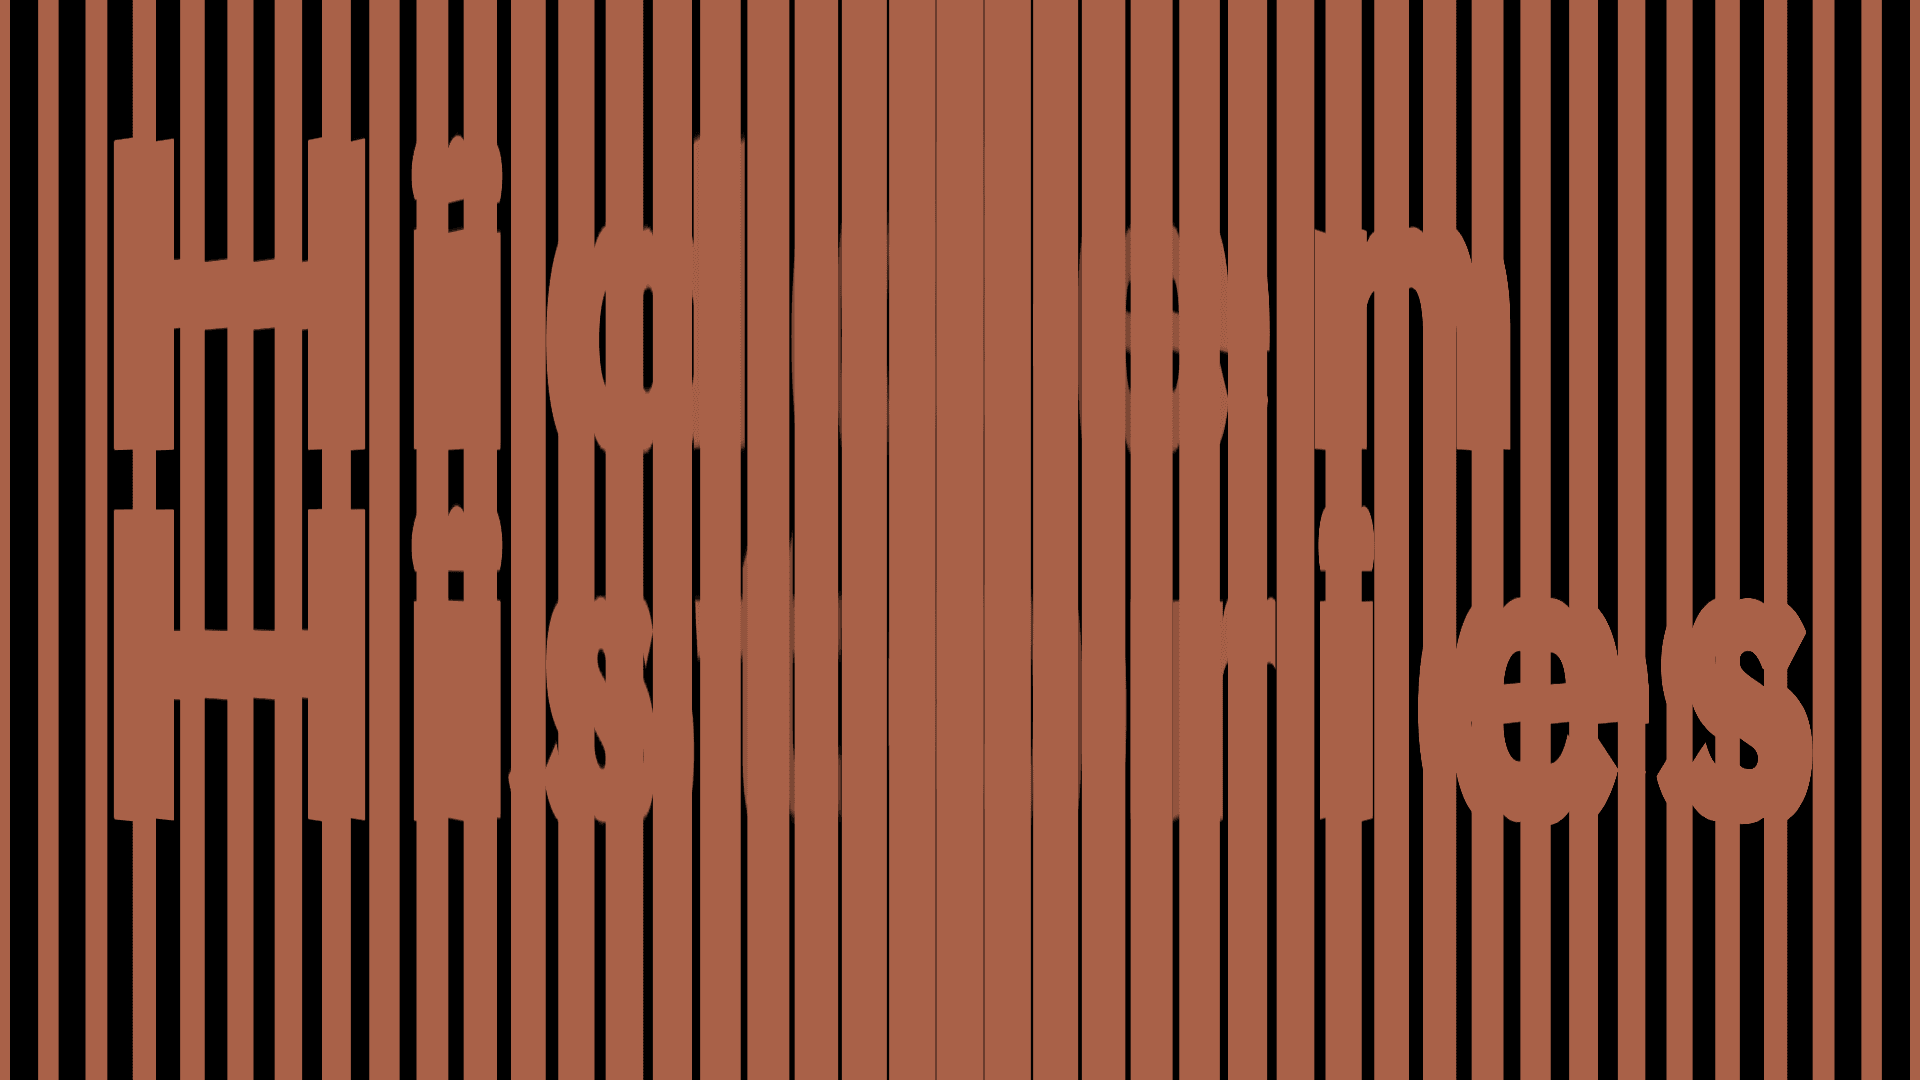 Graphic image with vertical stripes in brown and black. Somewhat hidden behind these stripes, the title 'Hidden Histories' is visible.